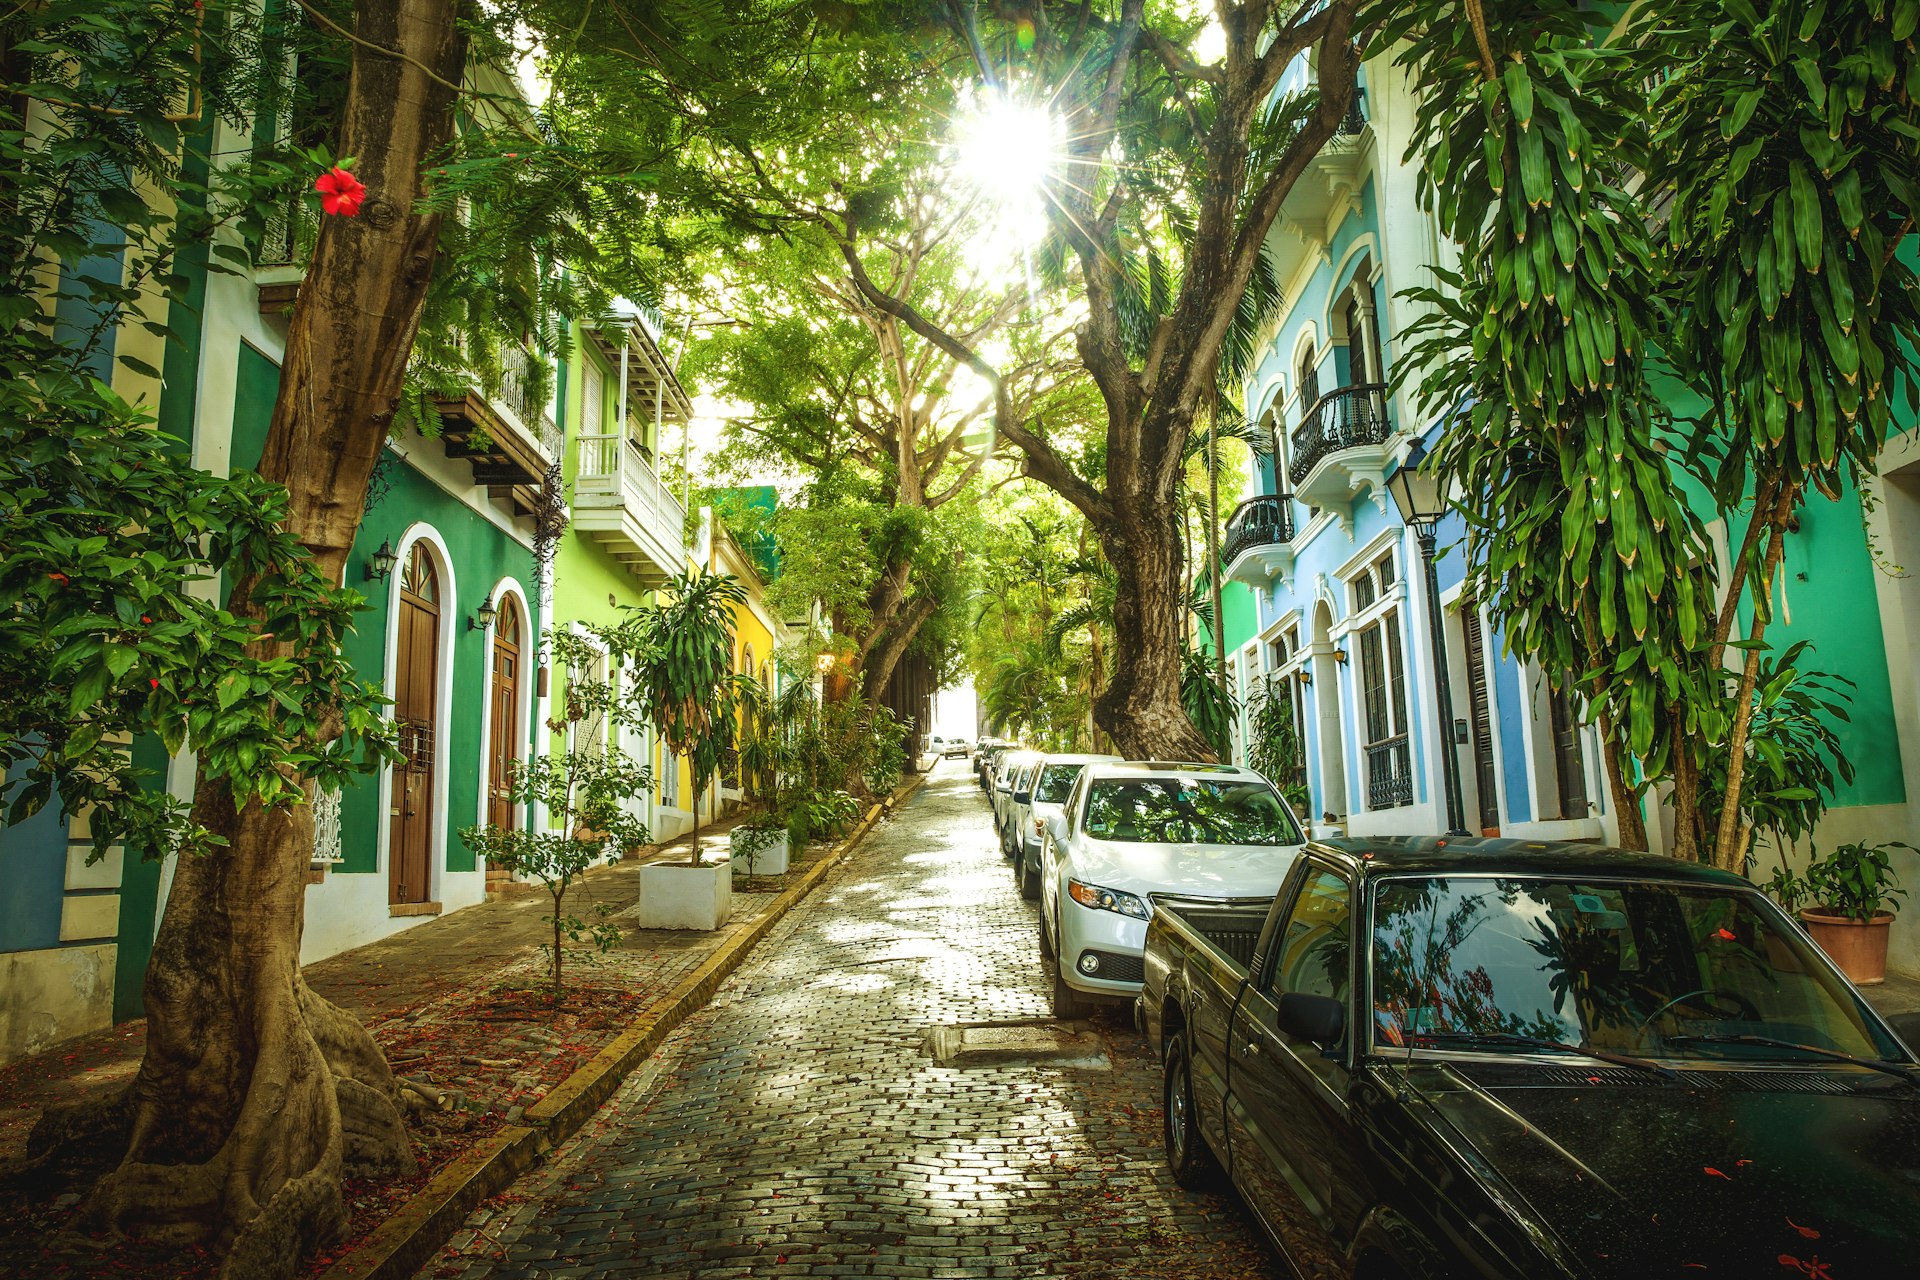 Cobblestone street full of trees and colourful buildings in old San Juan